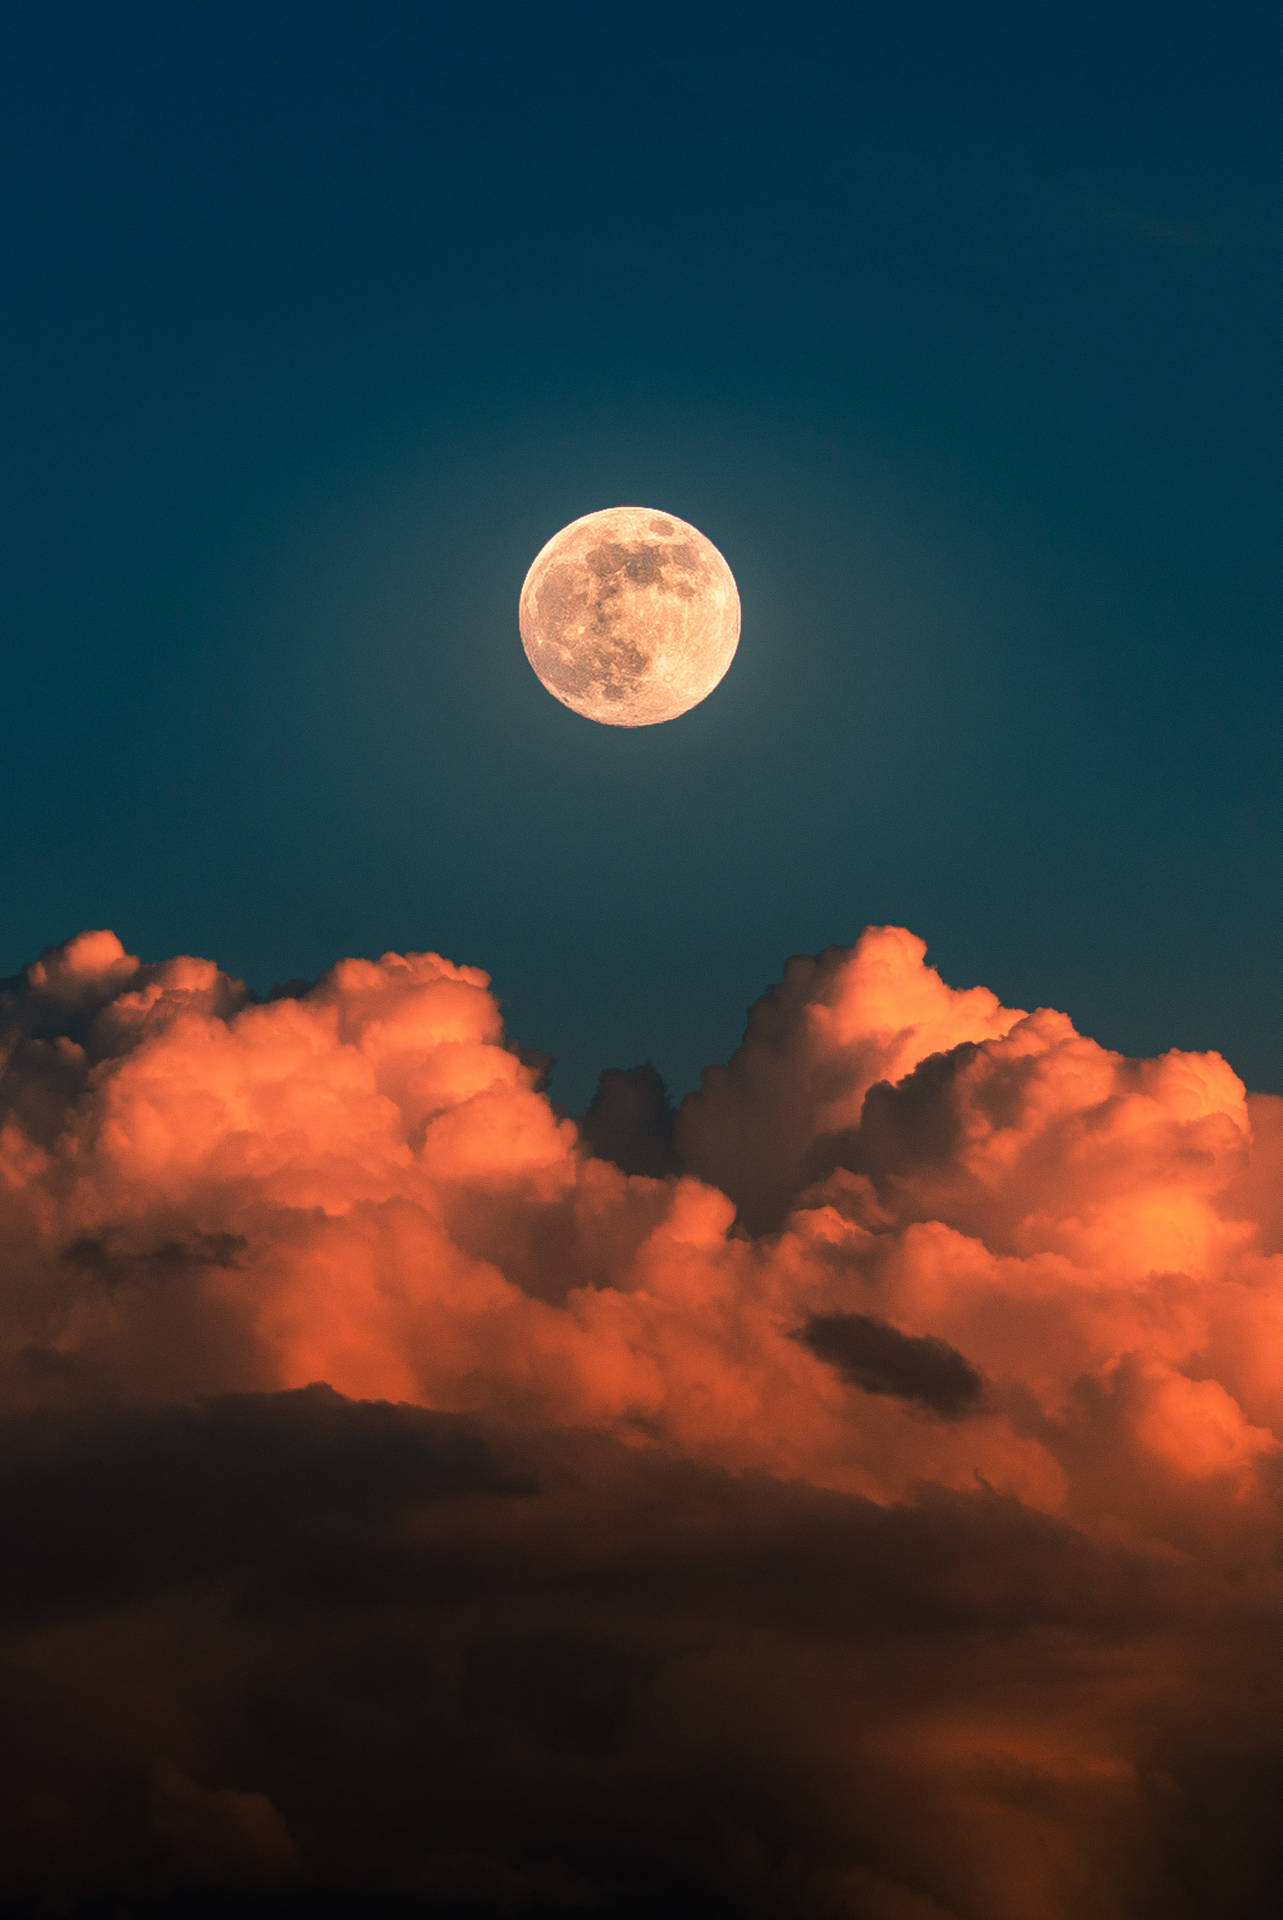 A view of the waxing crescent moon and clouds Wallpaper